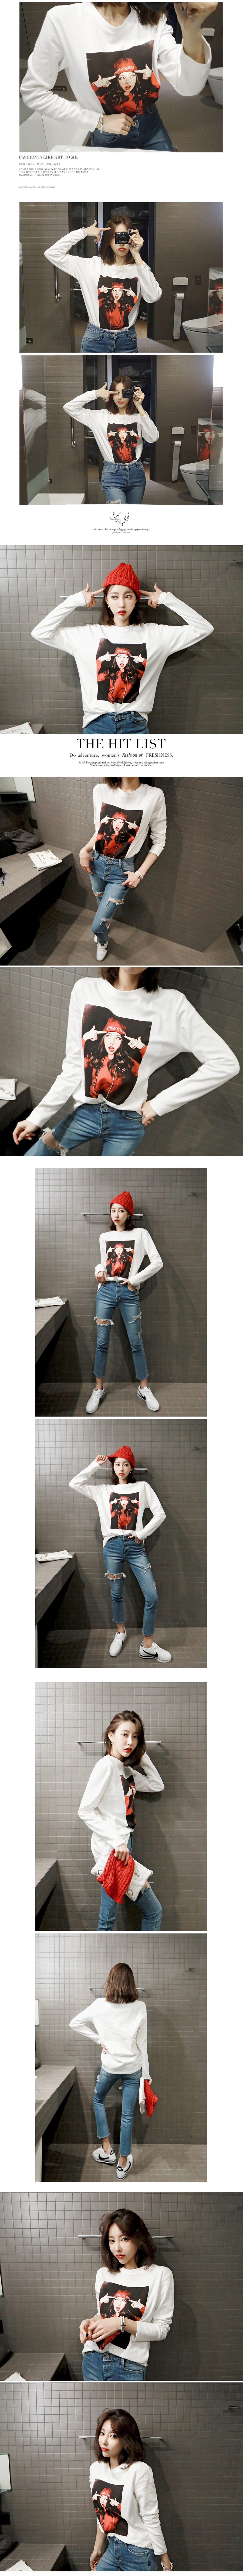 KOREA Red Beanie Girl Printed T-Shirt #Ivory One Size(S-M) [Free Shipping]